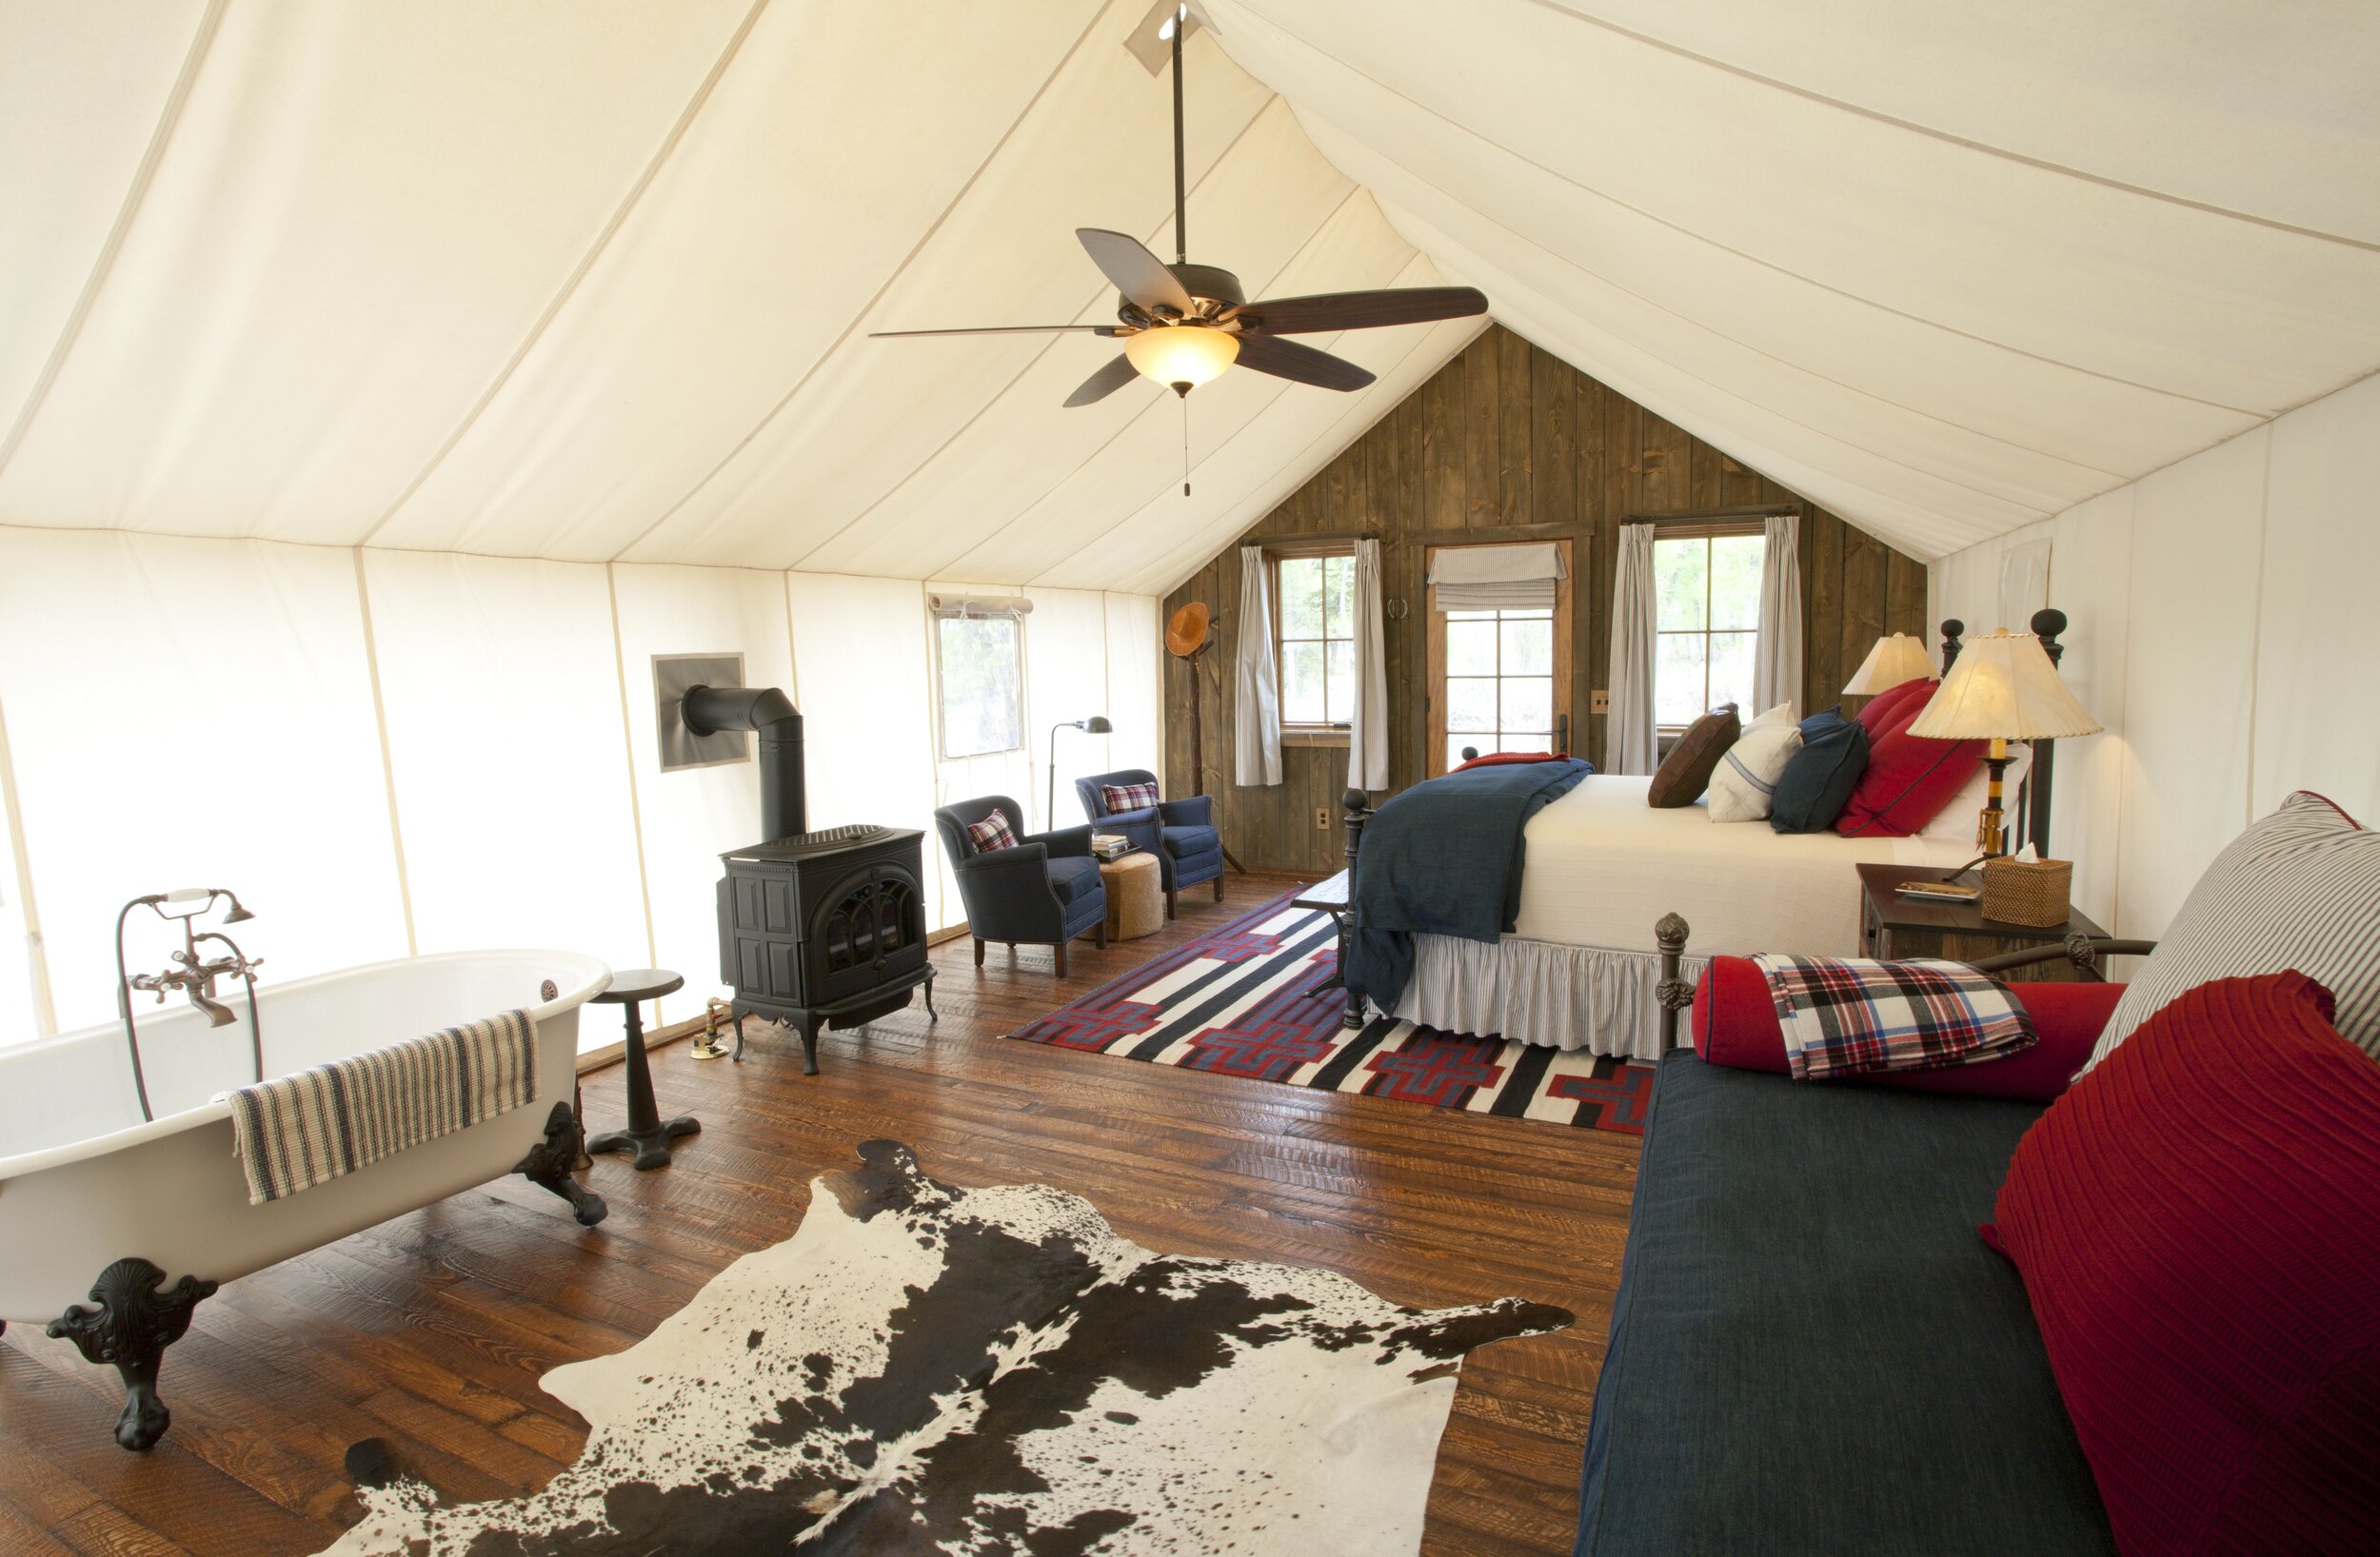   Inside one of the glamping accommodations on offer (photo credit: The Ranch at Rock Creek)  